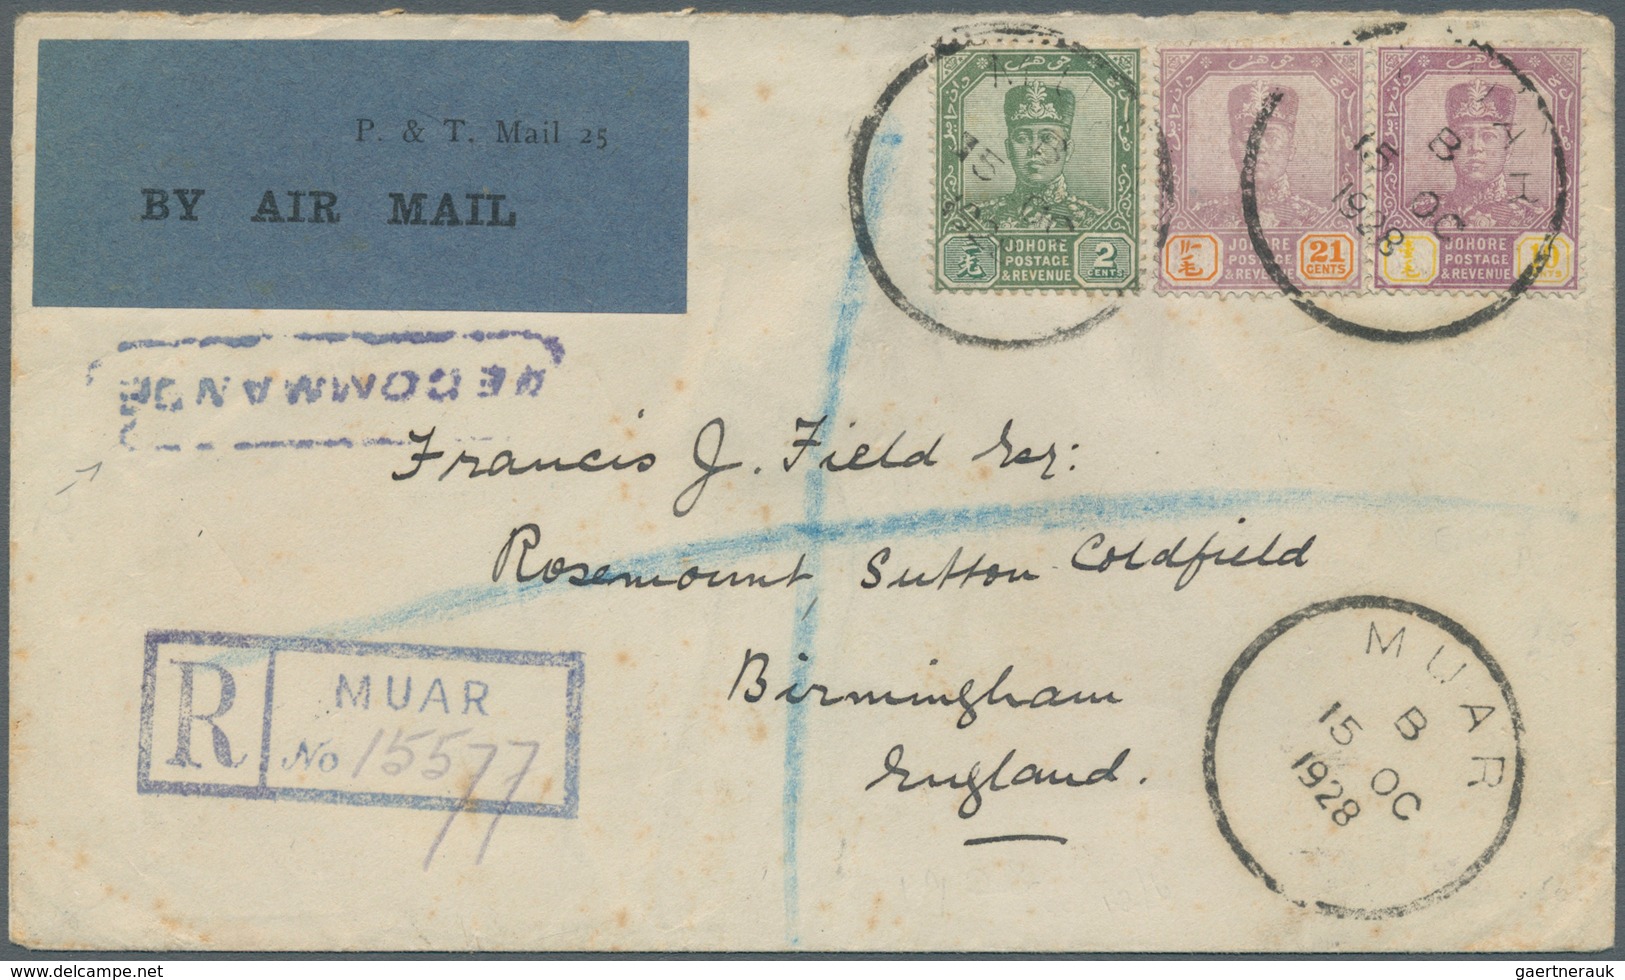 05687 Malaiische Staaten - Johor: 1928 Registered Airmail Cover From MUAR To Birmingham Via Penang And Lon - Johore